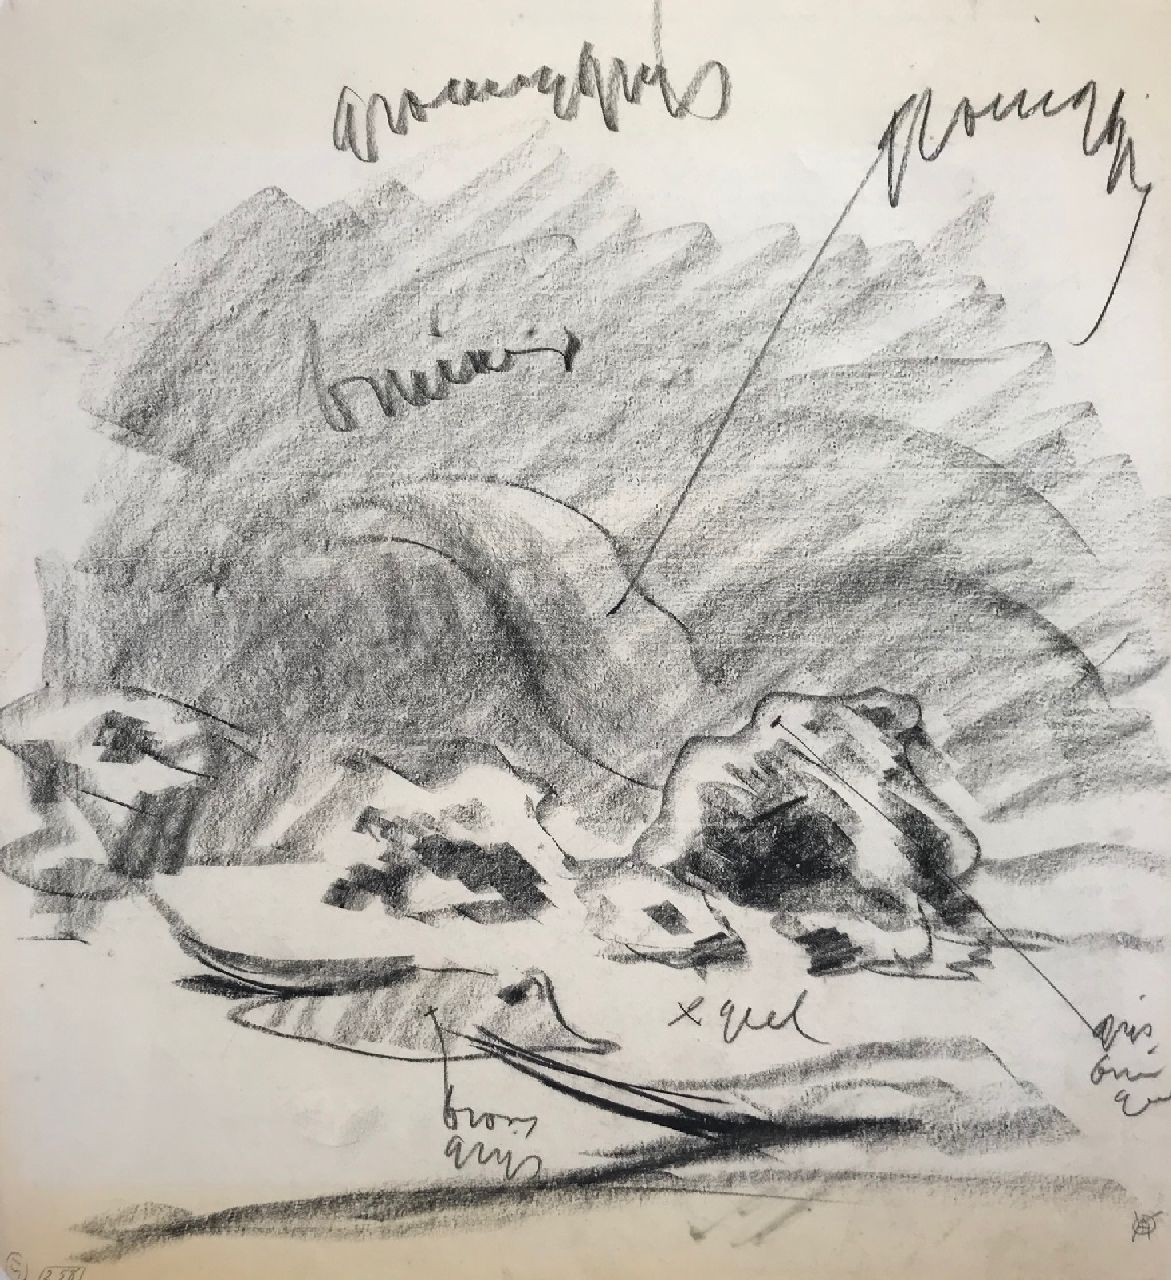 Dijsselhof G.W.  | Gerrit Willem Dijsselhof | Watercolours and drawings offered for sale | Study of an aquarium, charcoal on paper 37.5 x 34.5 cm, signed l.r. with monogram